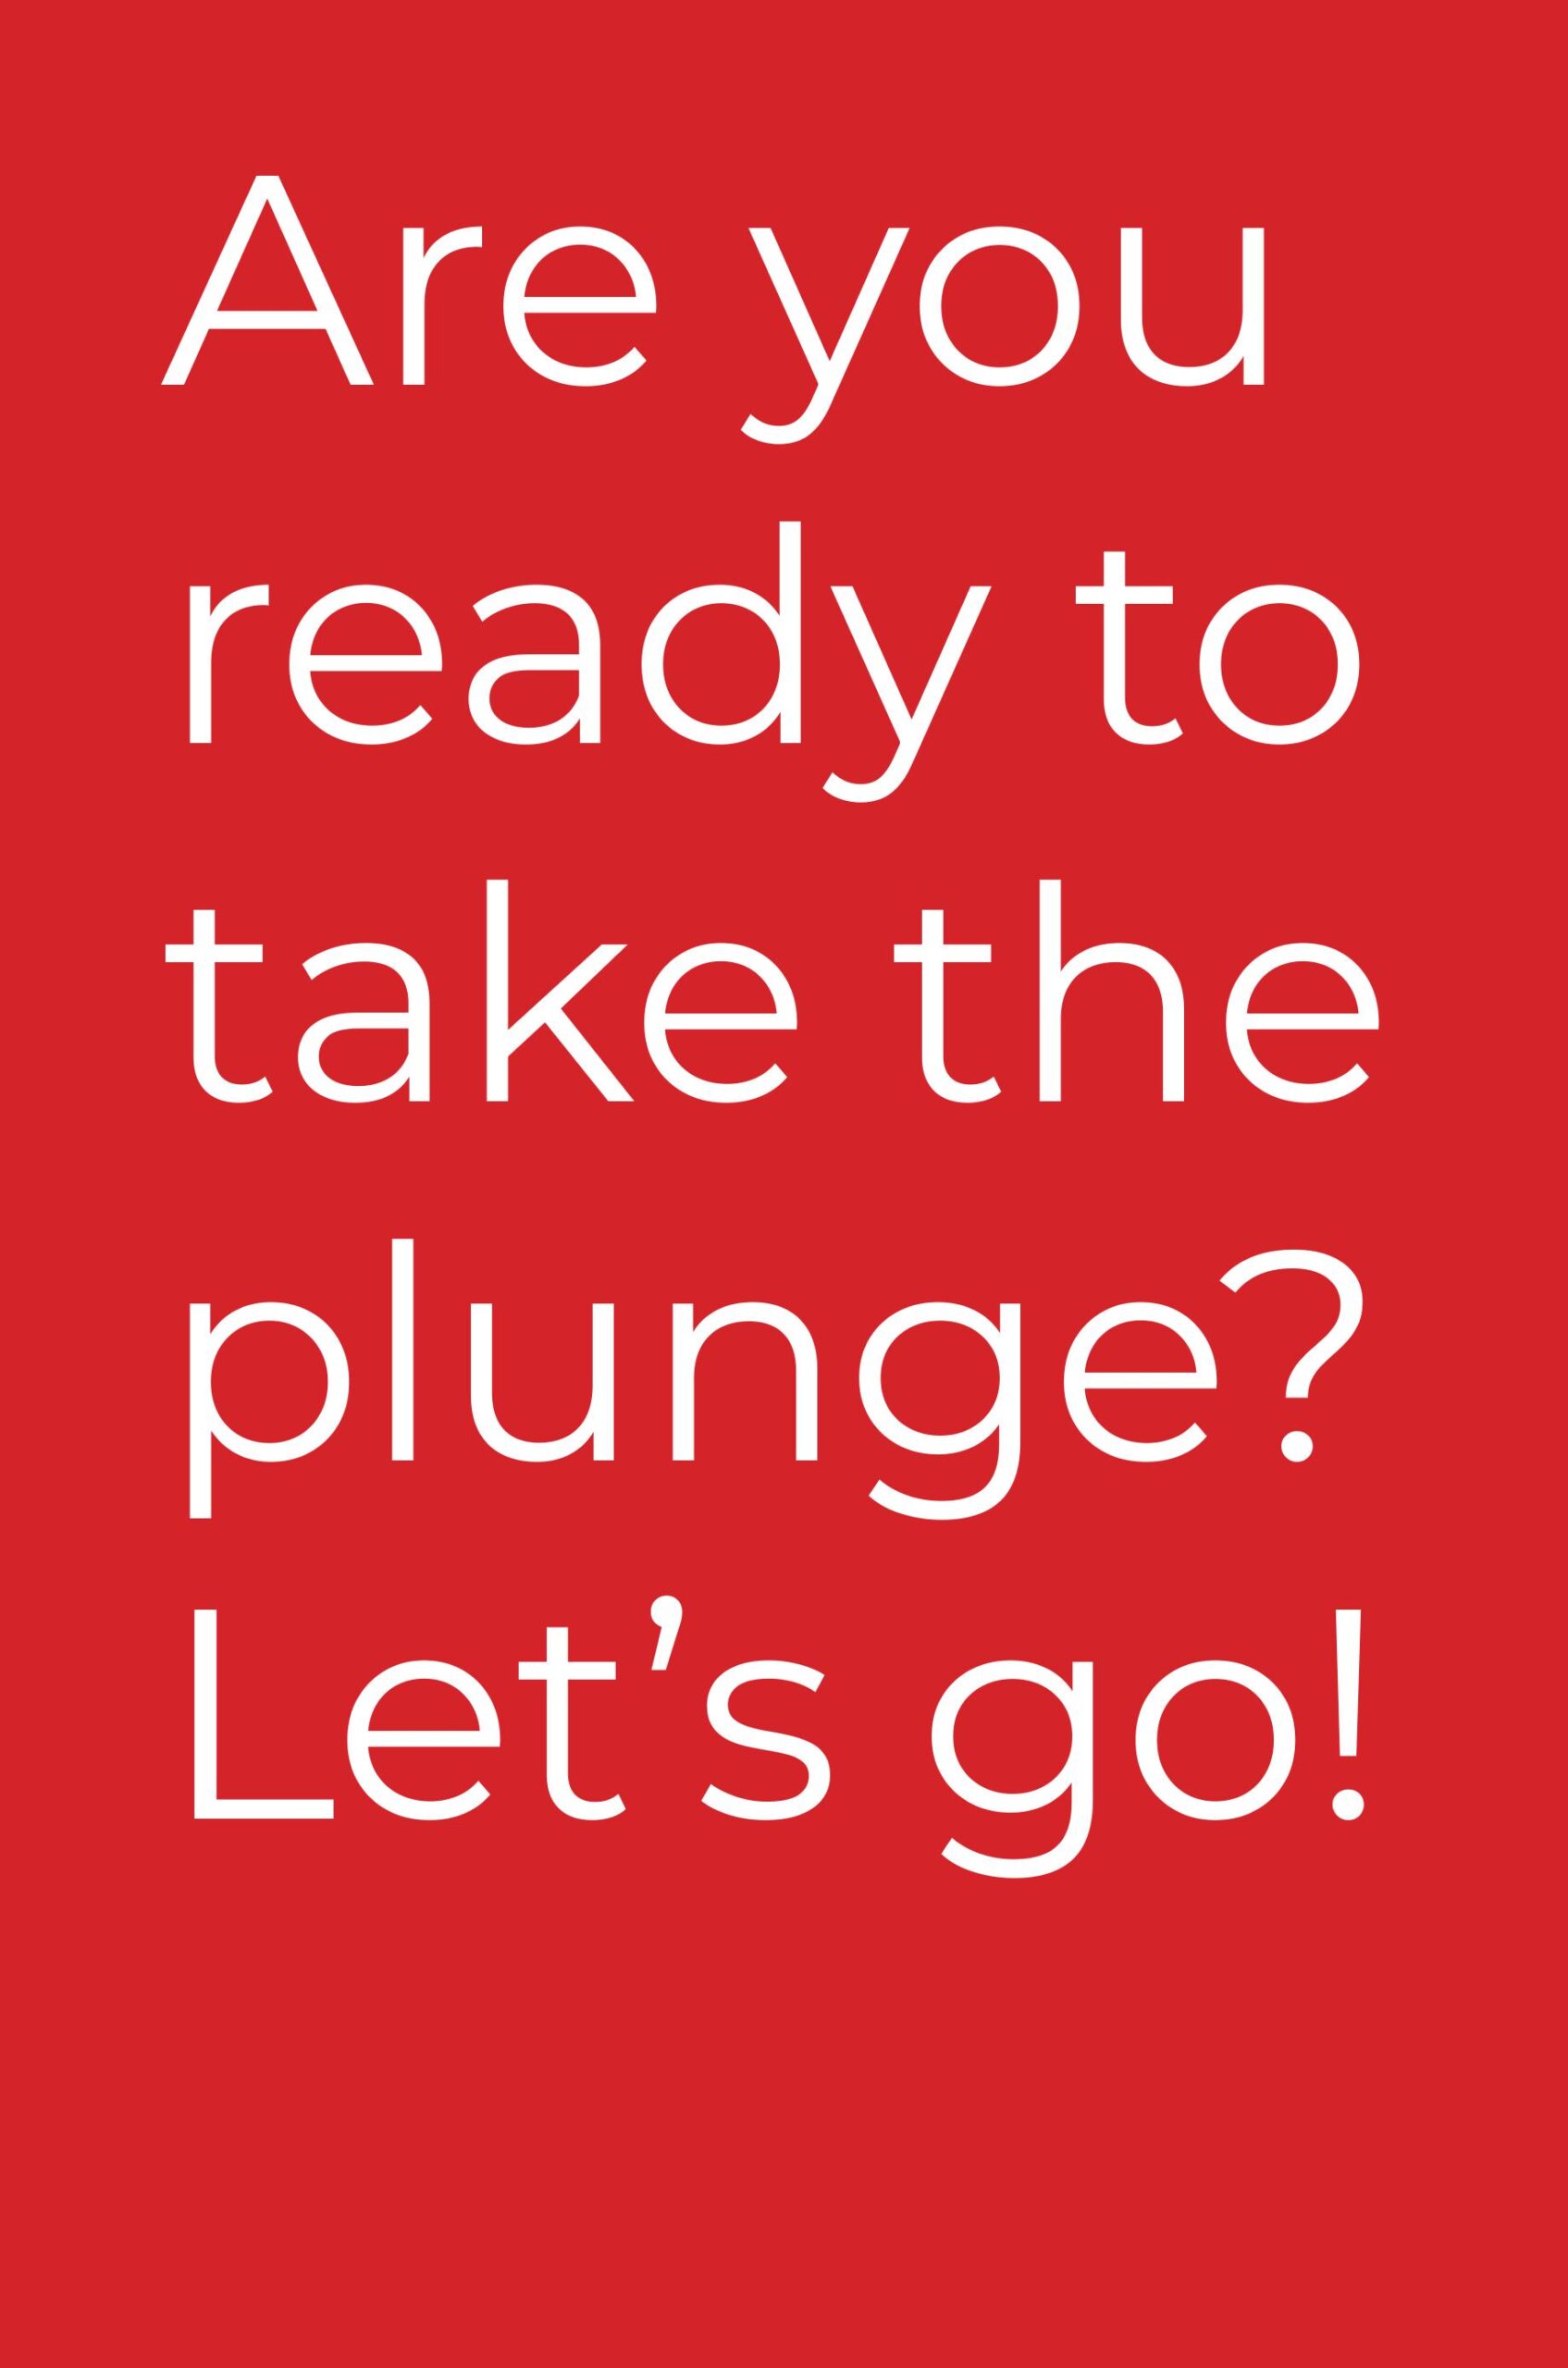 Quote: are you ready to take the plunge?